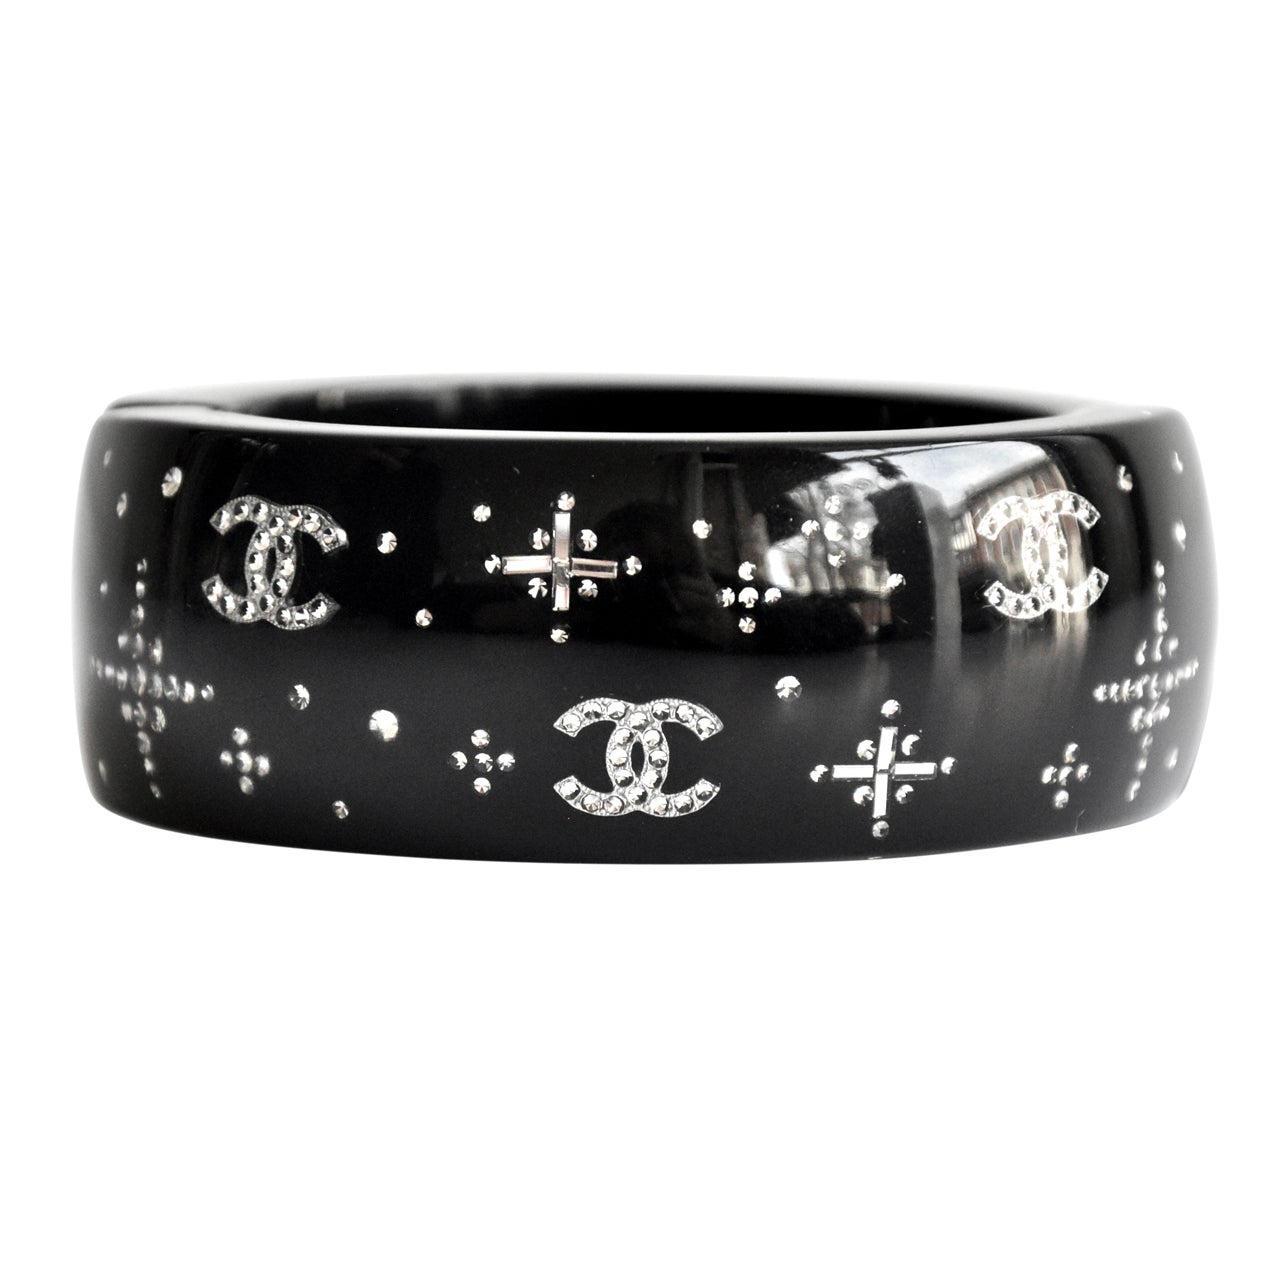 Chanel Lucite Cuff Bracelet at 1stdibs